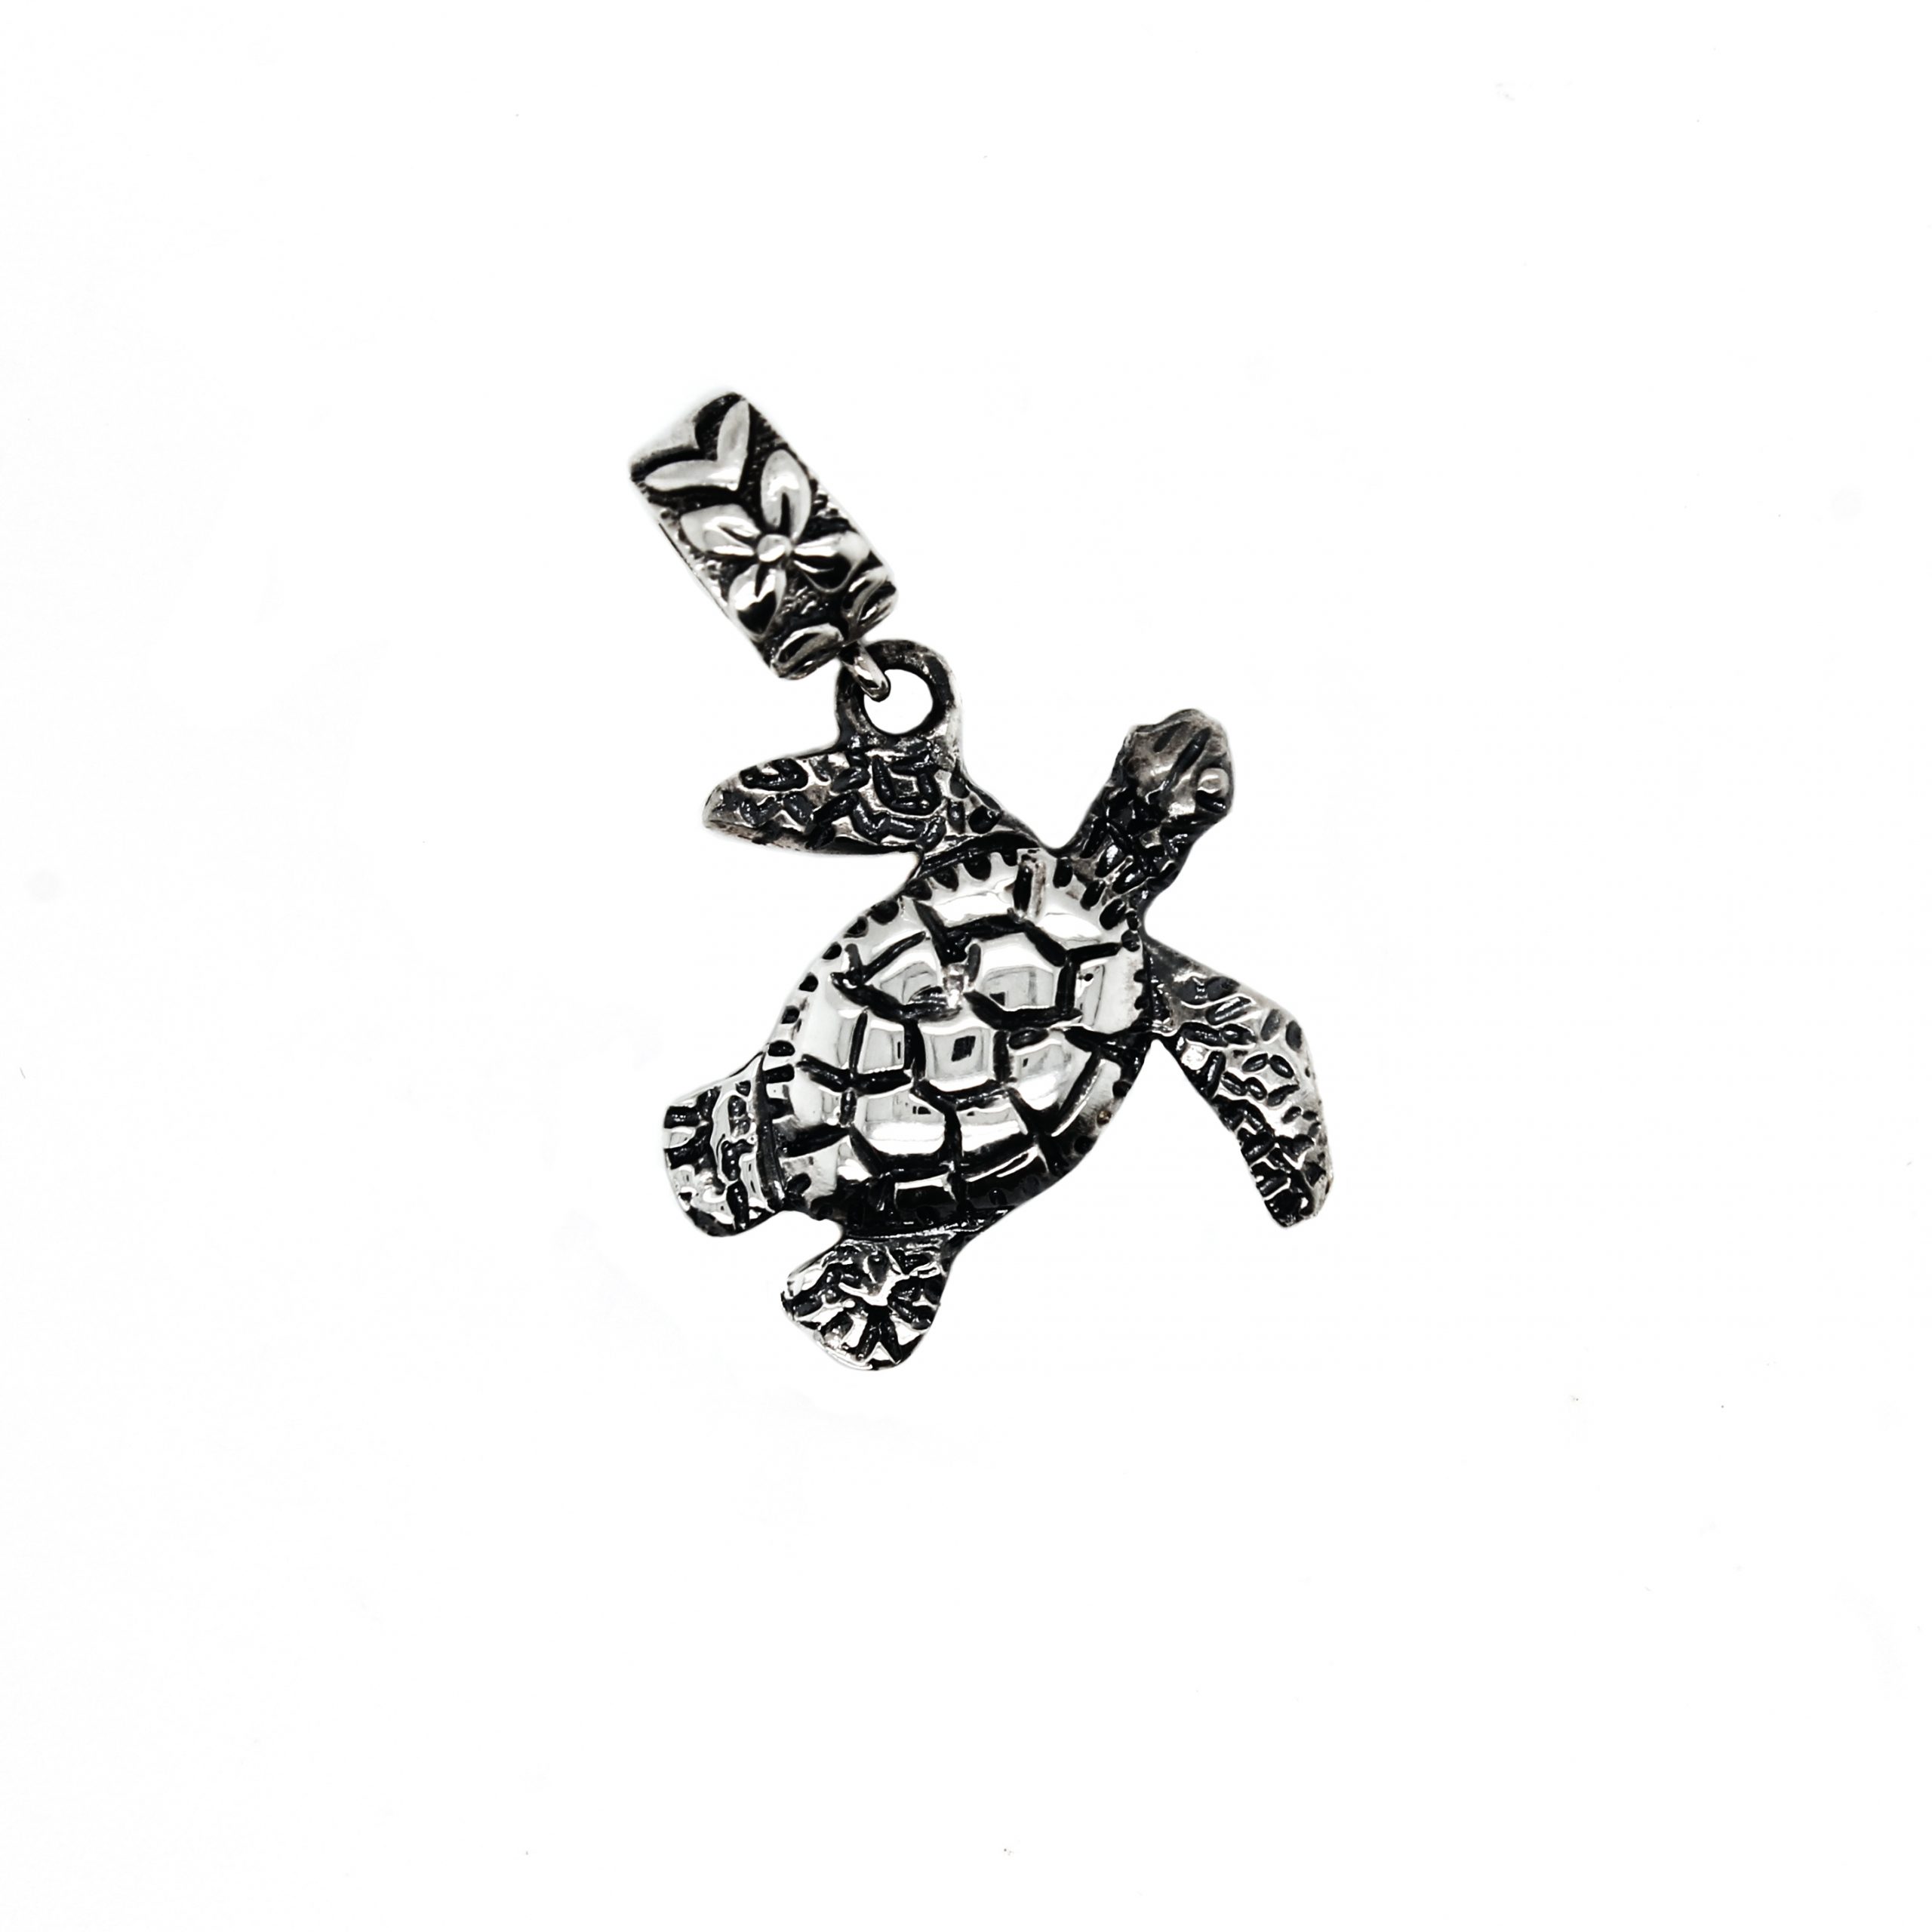 Sterling Silver Turtle Charm